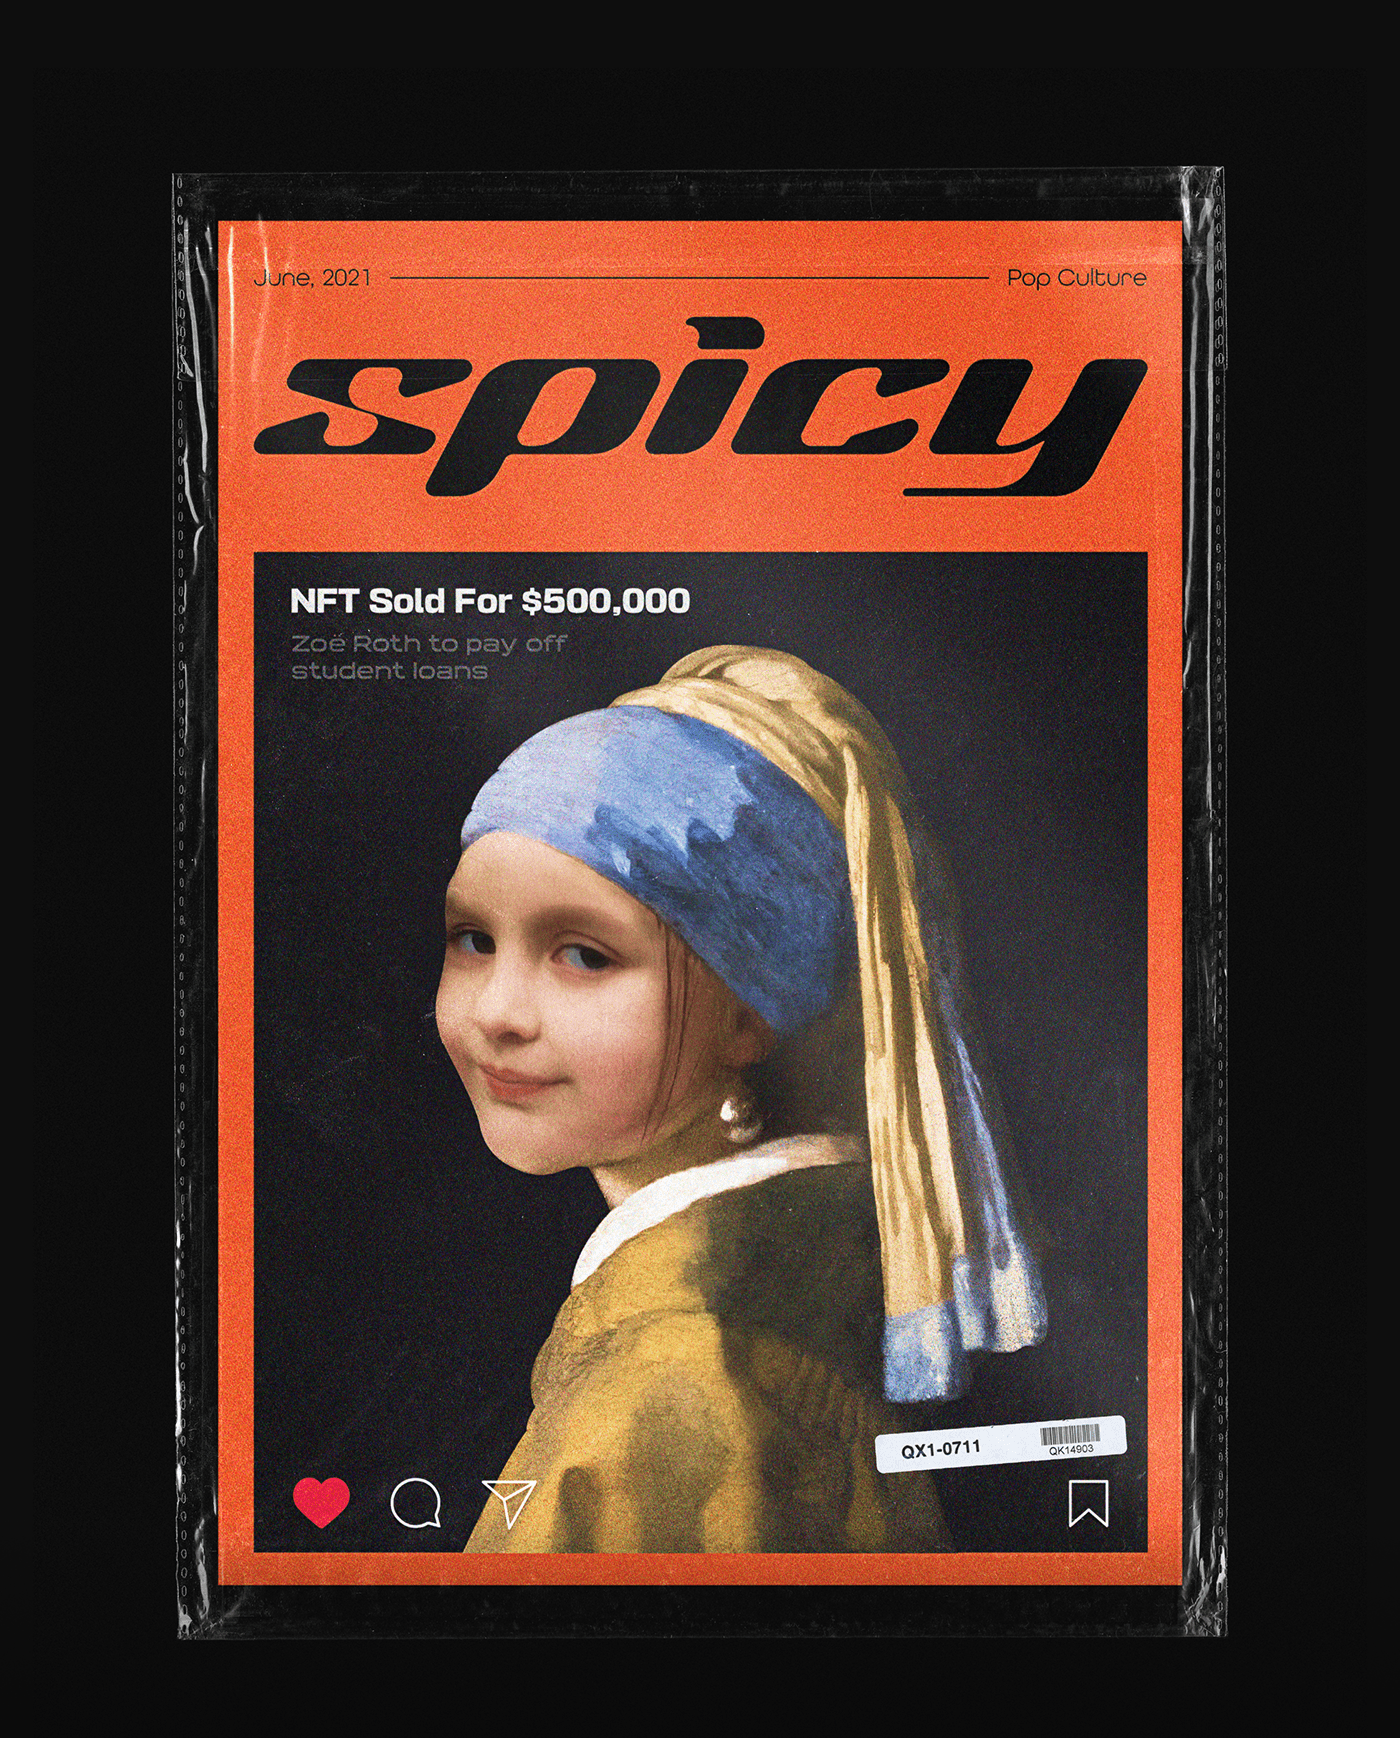 Humorous photoshopped poster, a mixture of famous meme disaster girl and girl with a pearl earring.